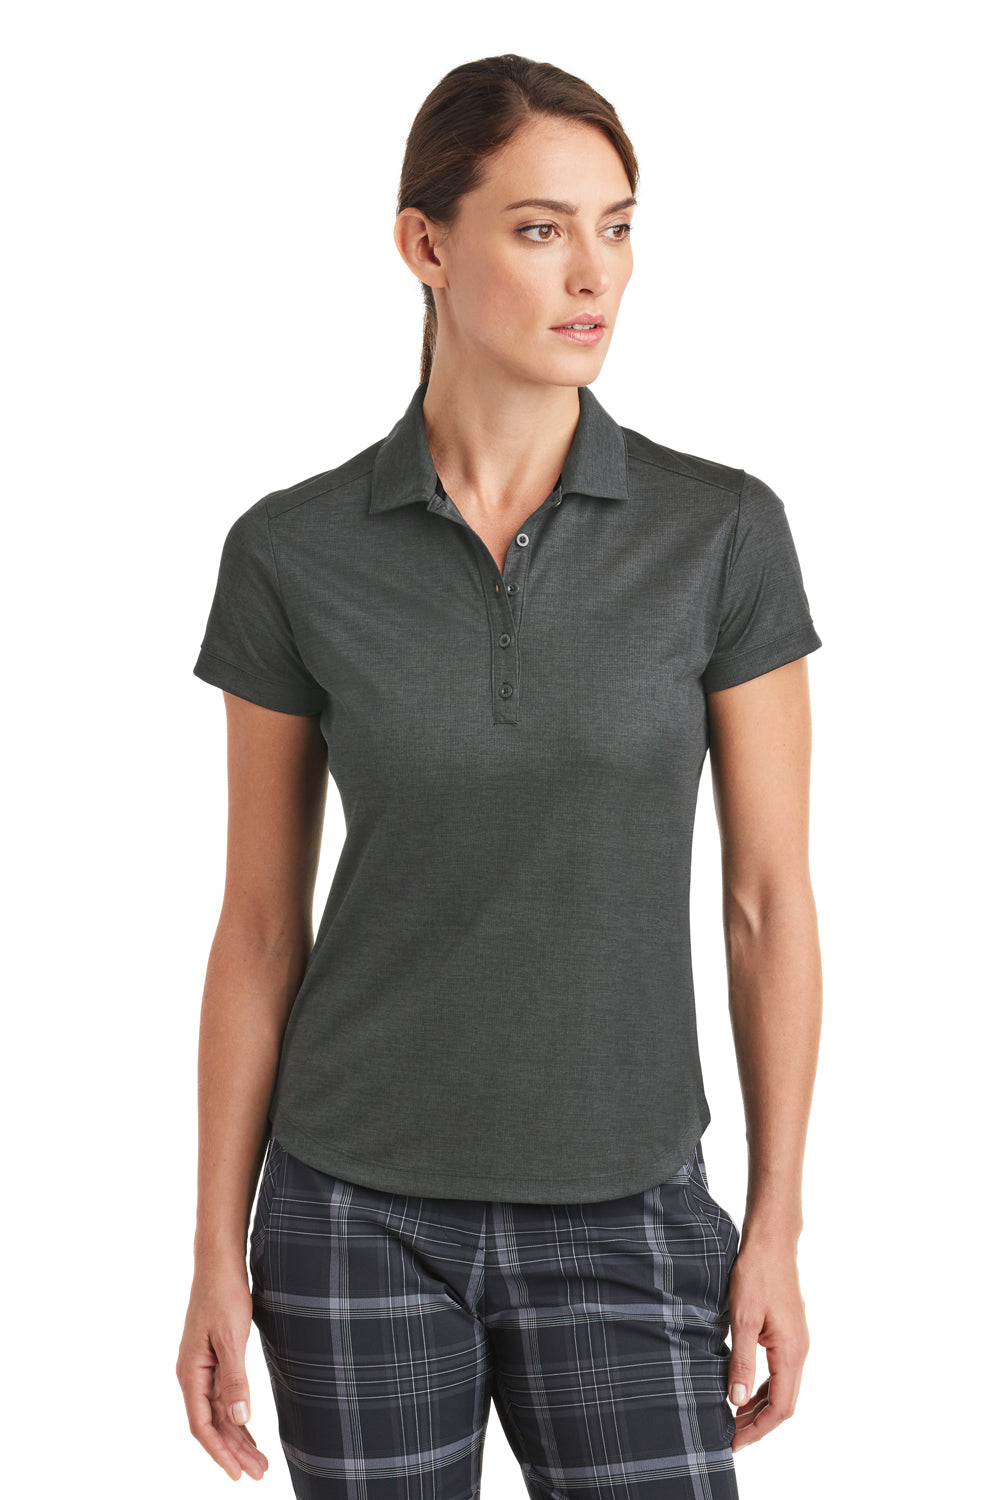 Nike 838961 Womens Dri-Fit Moisture Wicking Short Sleeve Polo Shirt Anthracite Grey Model Front